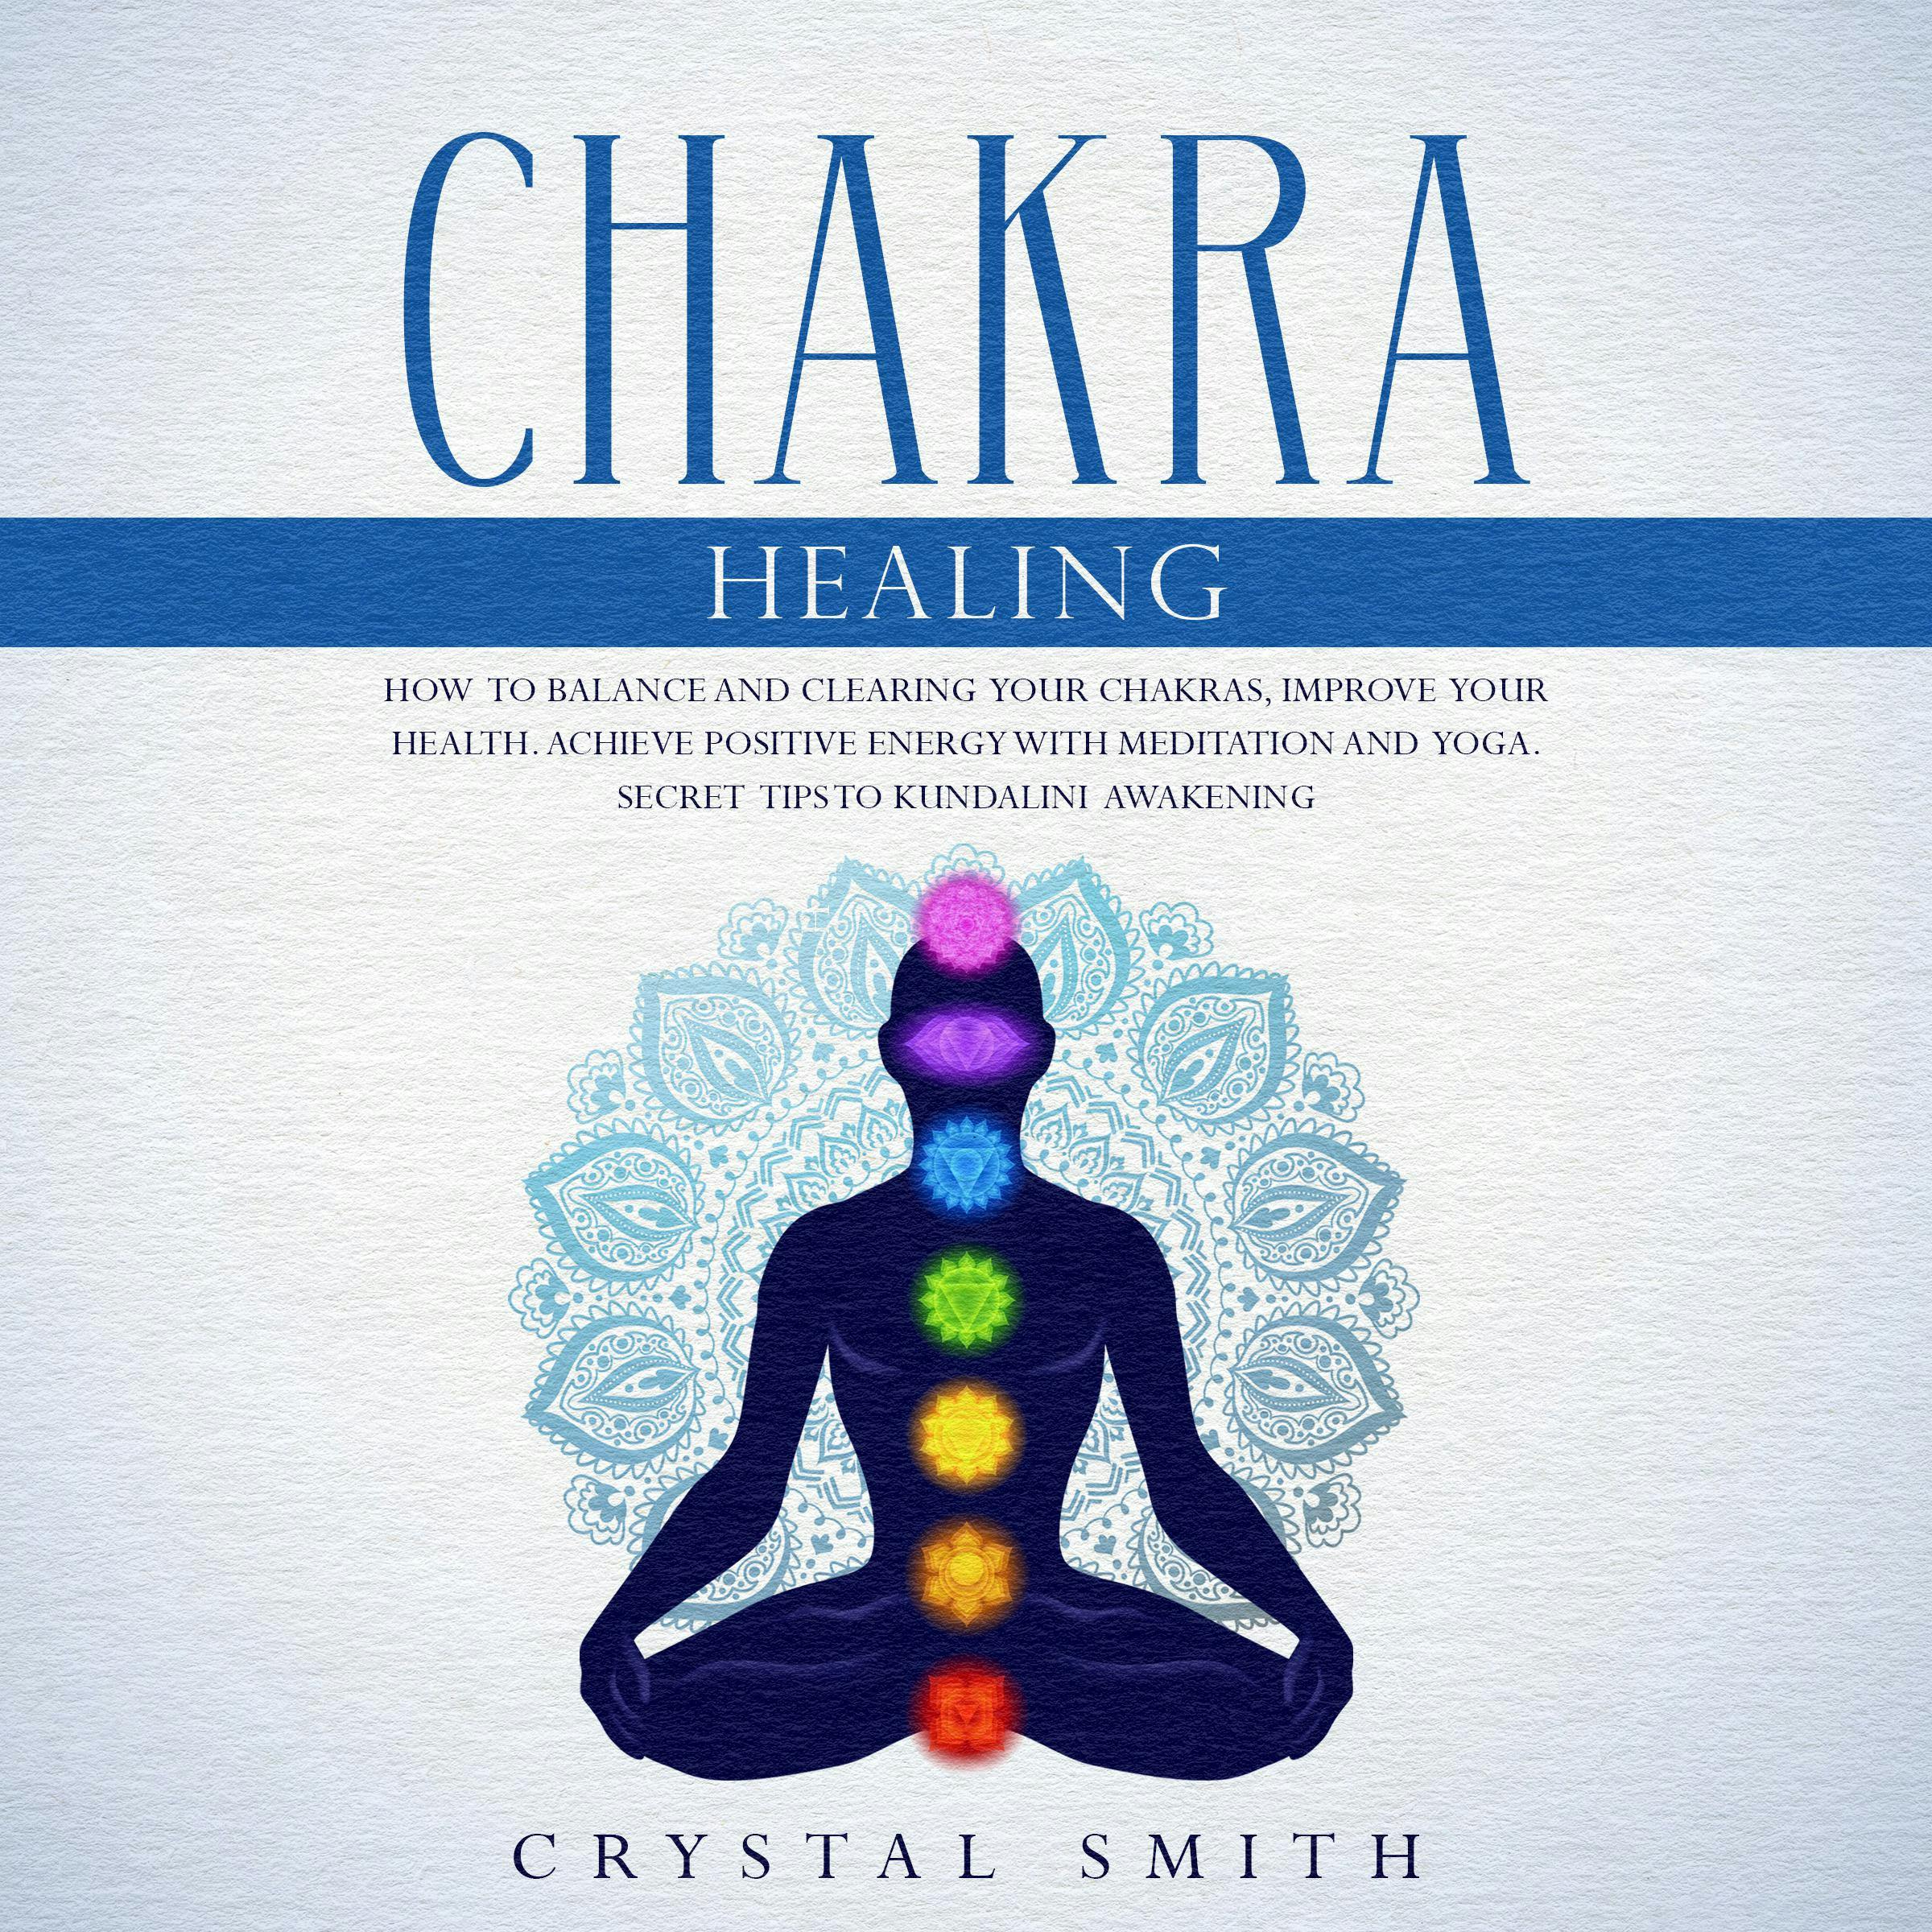 How to Balance Your Chakras for Wellbeing